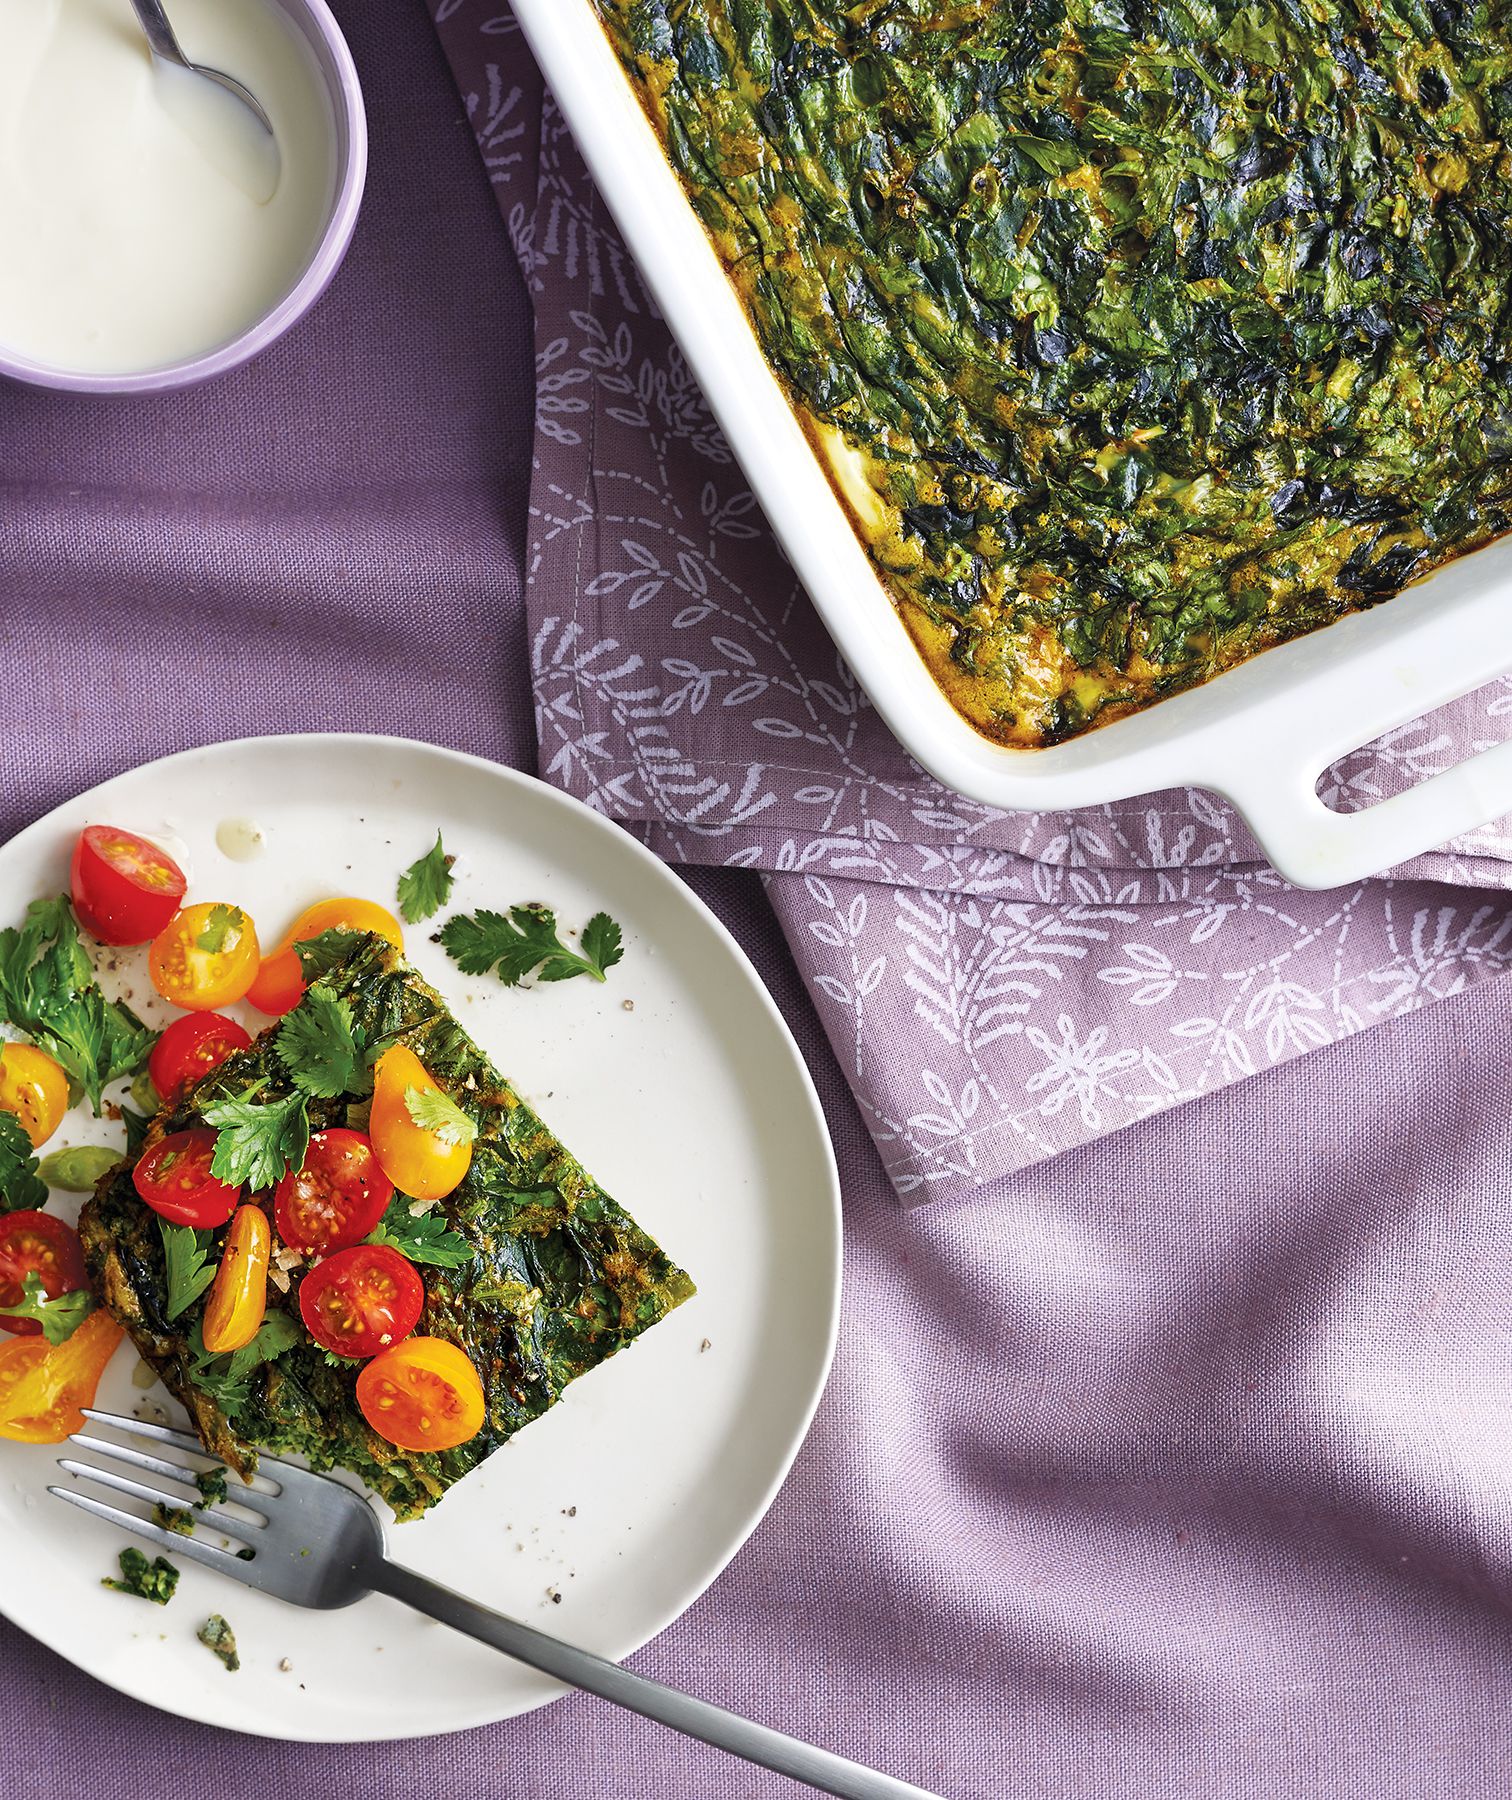 Chard & Herb Frittata With Cherry Tomatoes